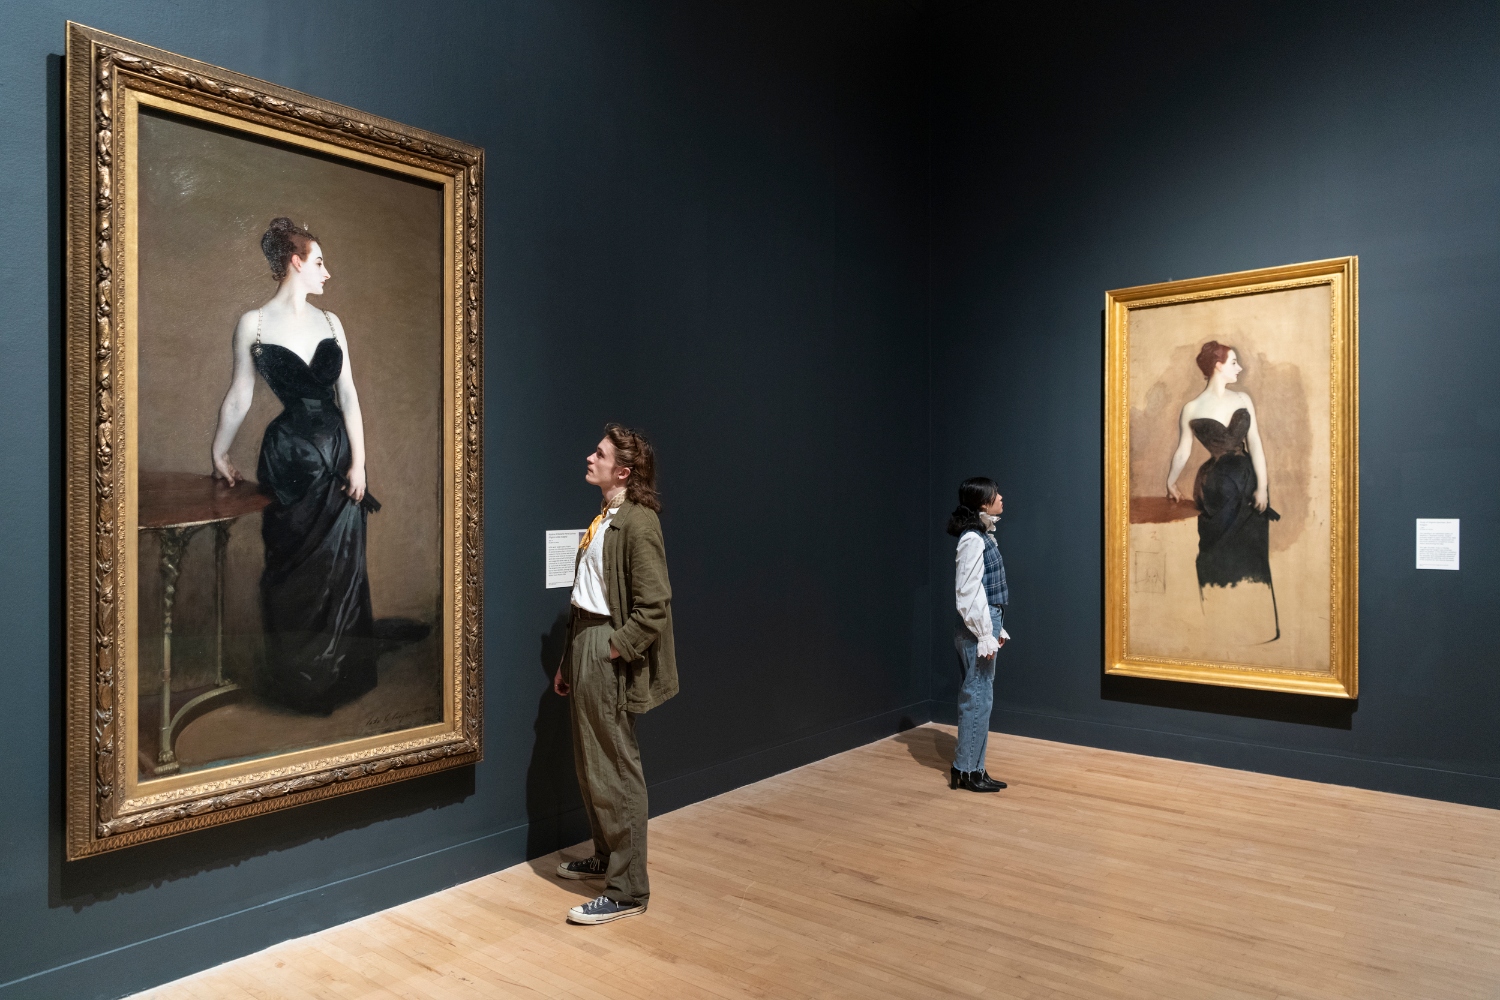 Best in Show: How John Singer Sargent Fashioned Identity